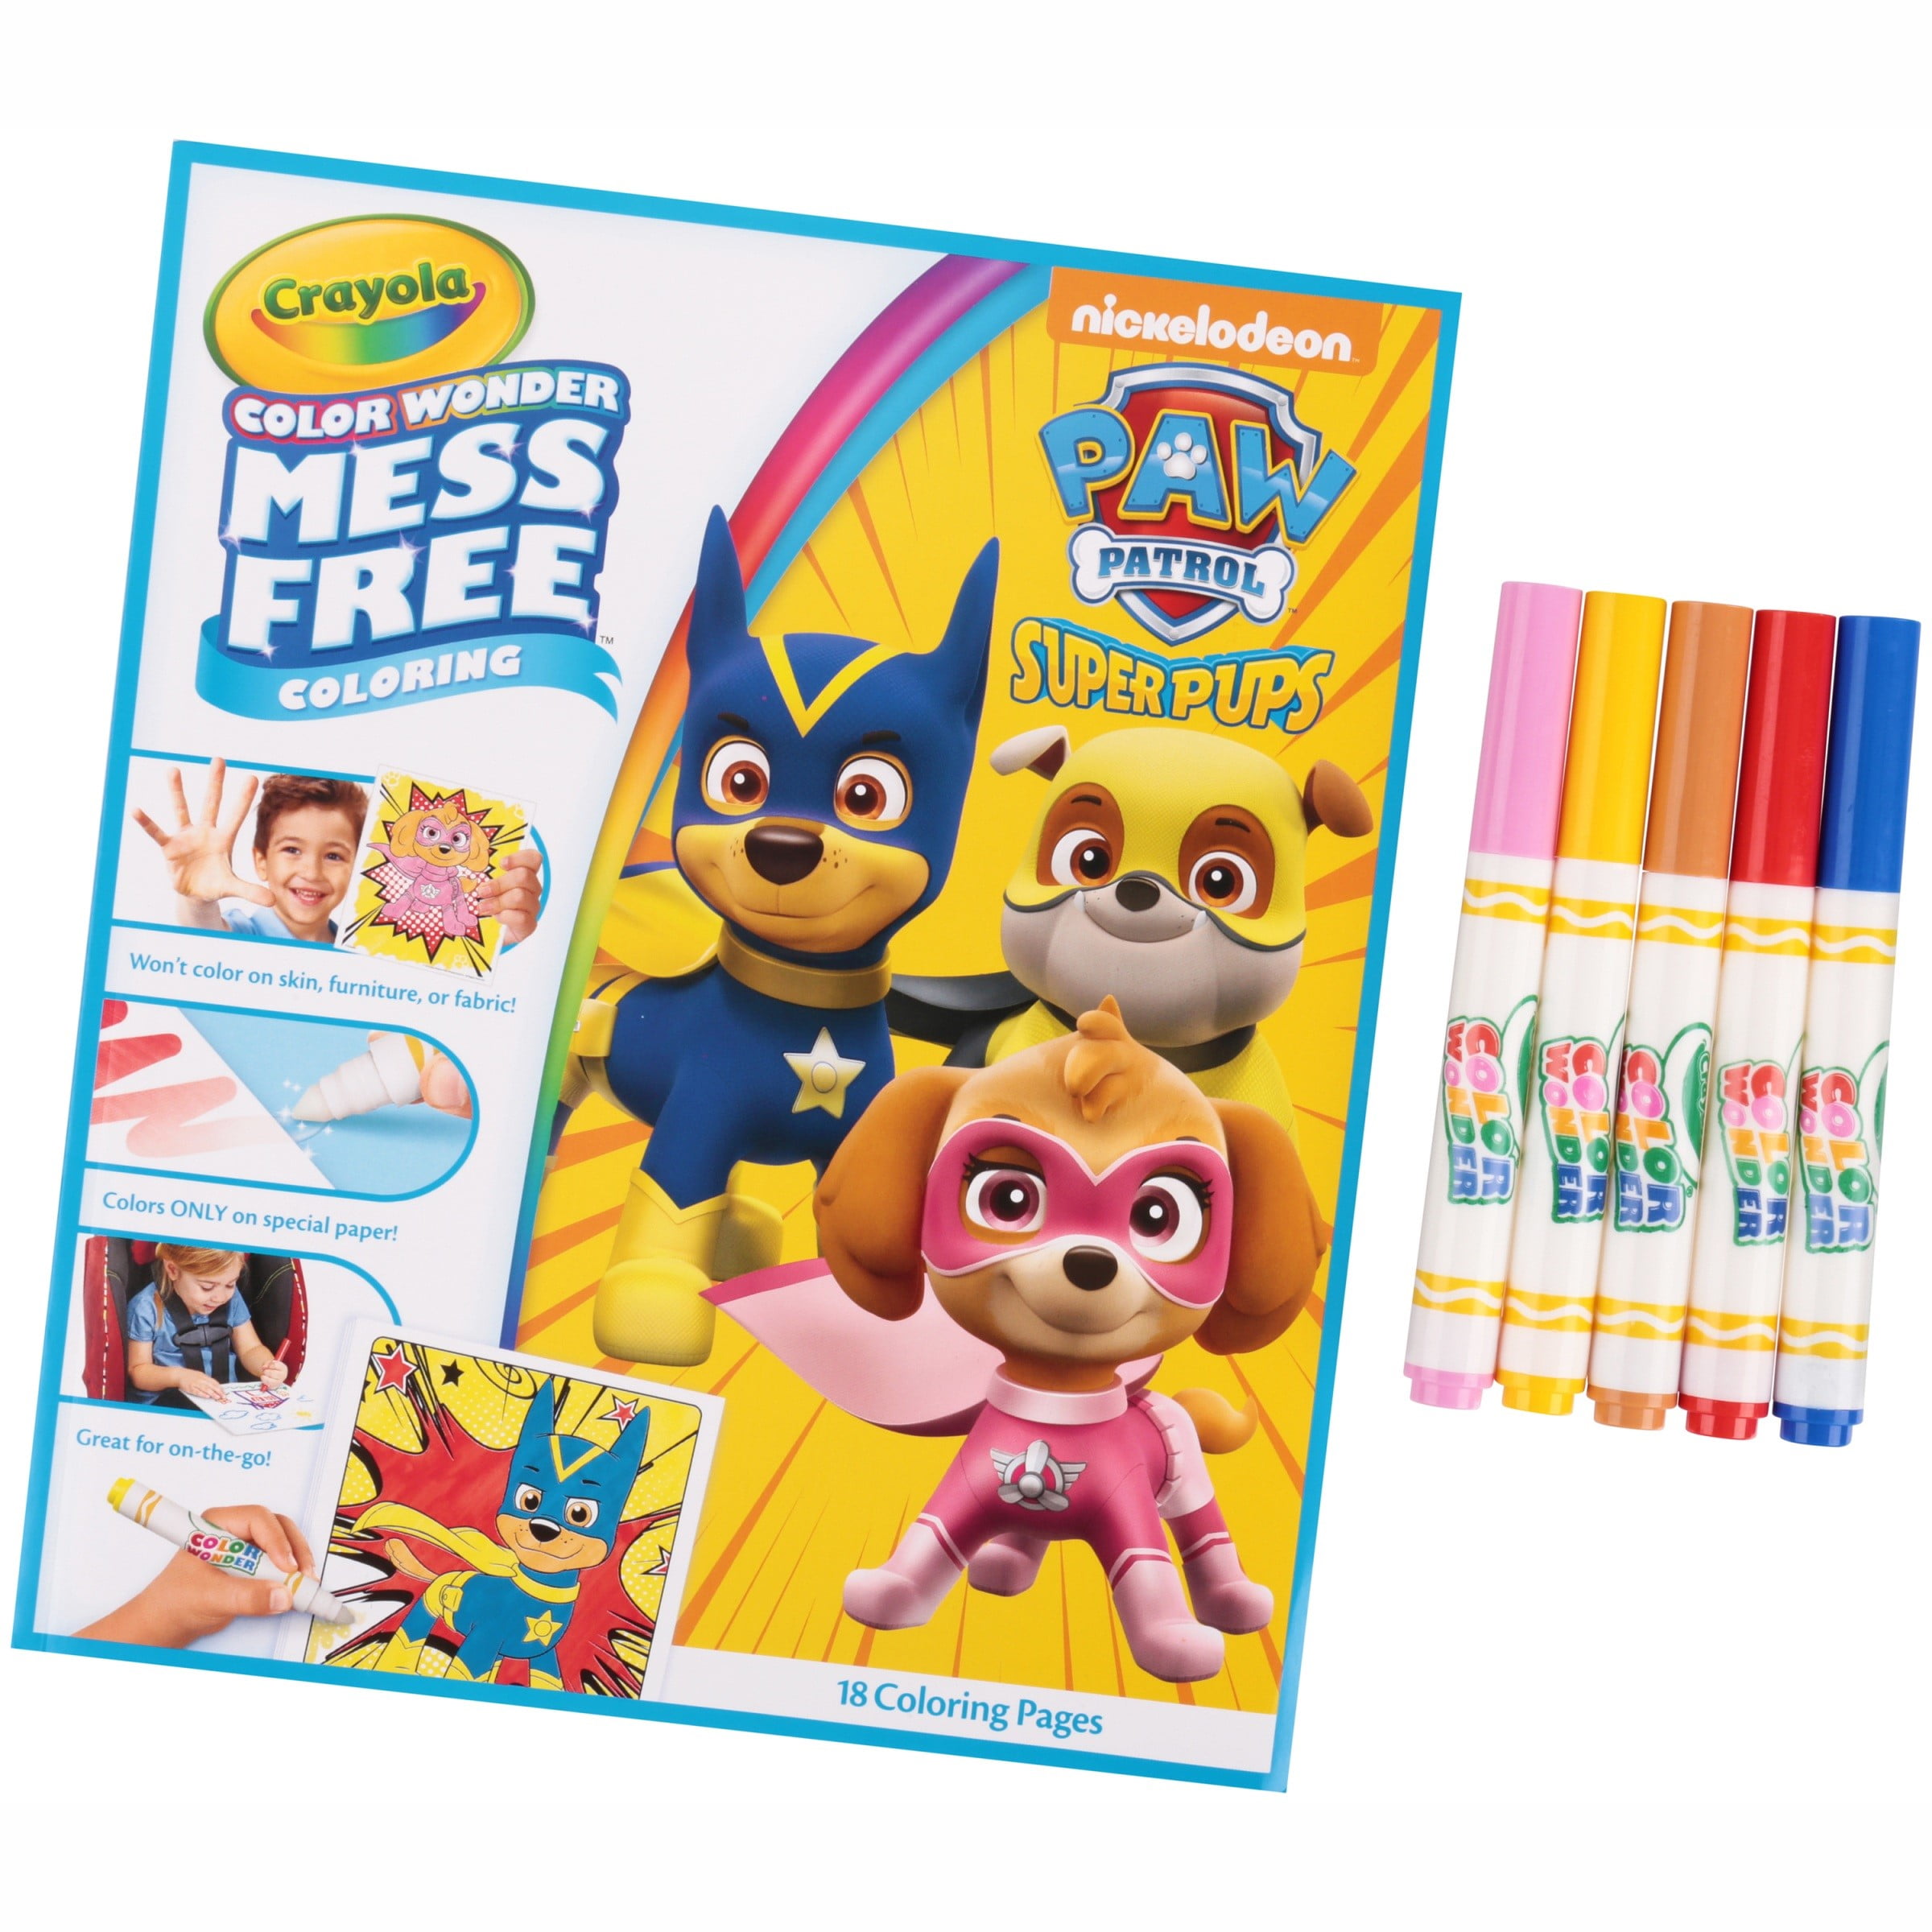 Crayola Paw Patrol Color Wonder, Ready Race Rescue, Mess Free